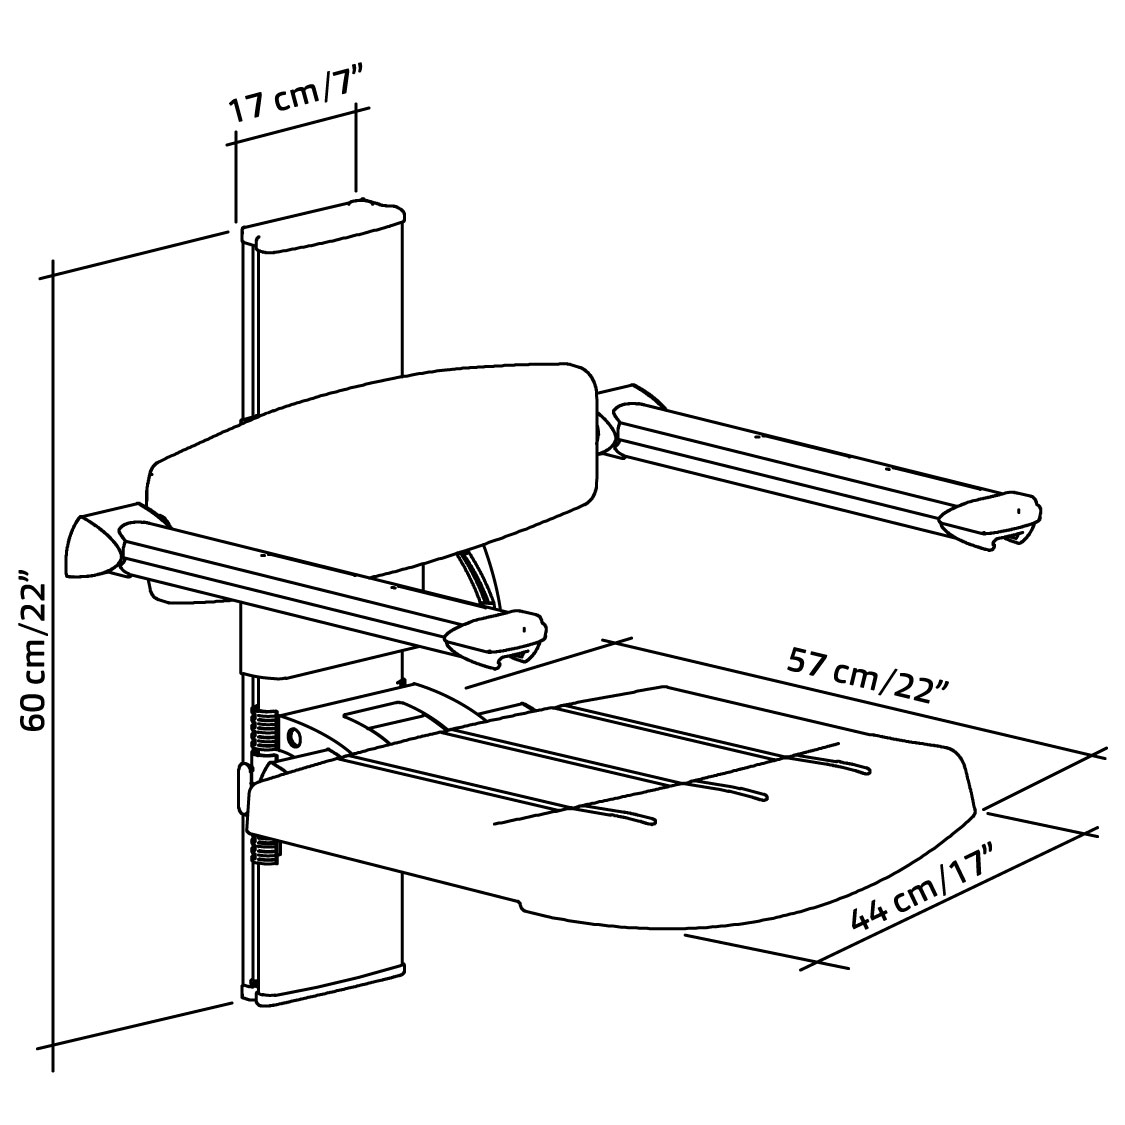 31-132-xx-wall-mounted-shower-seat-with-backrest-armrest-height-adjustable-diagram